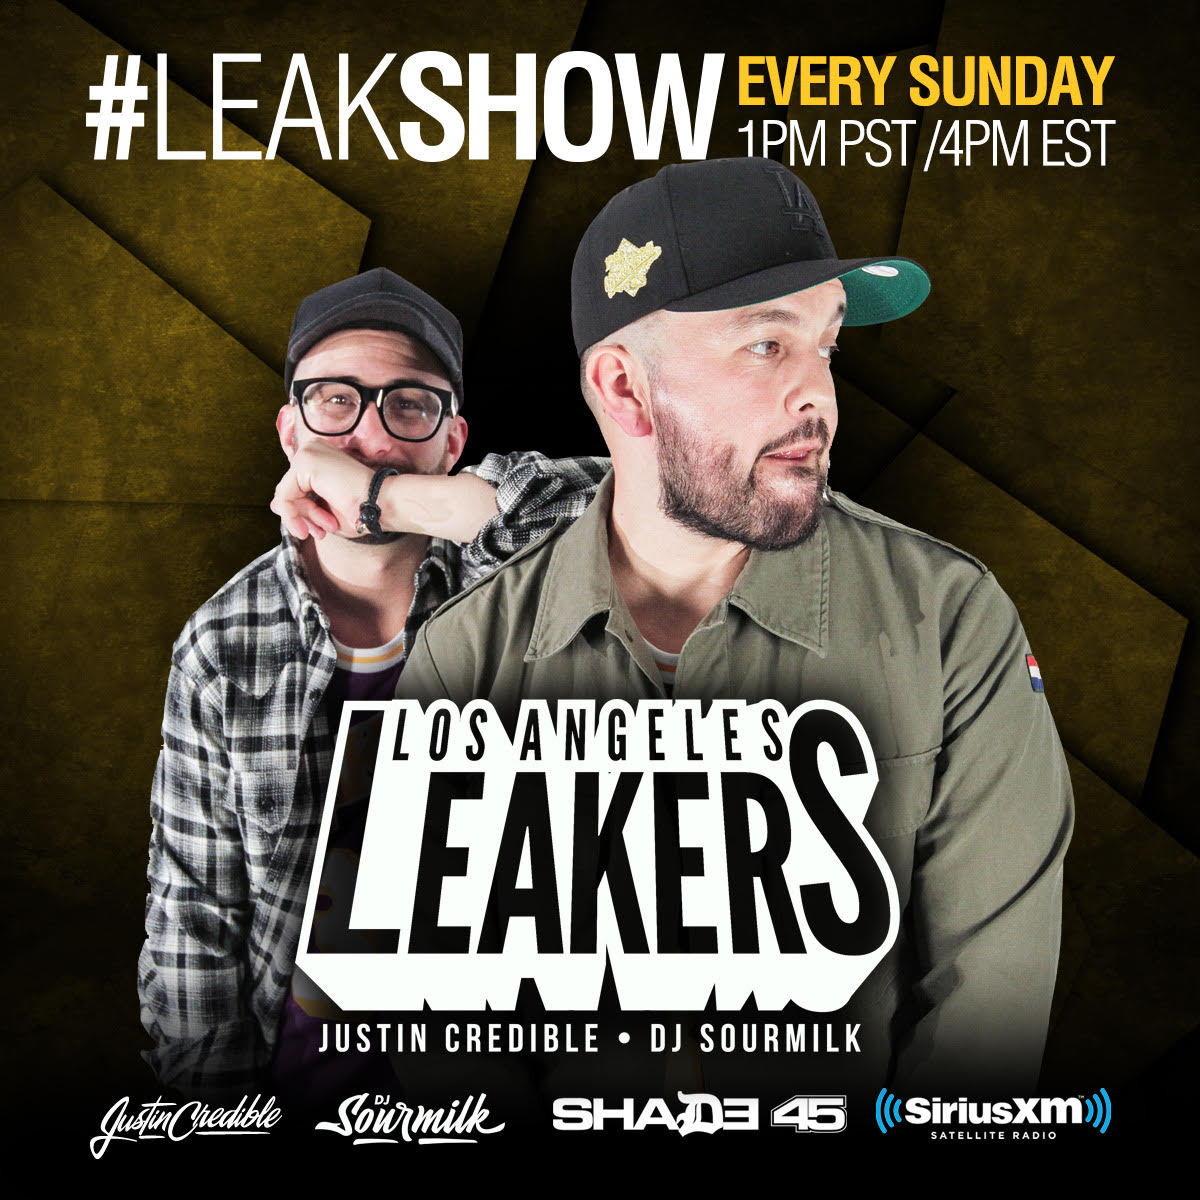 Check Out The Complete Playlist From Yesterday’s #LEAKSHOW On Shade 45 [PEEP]